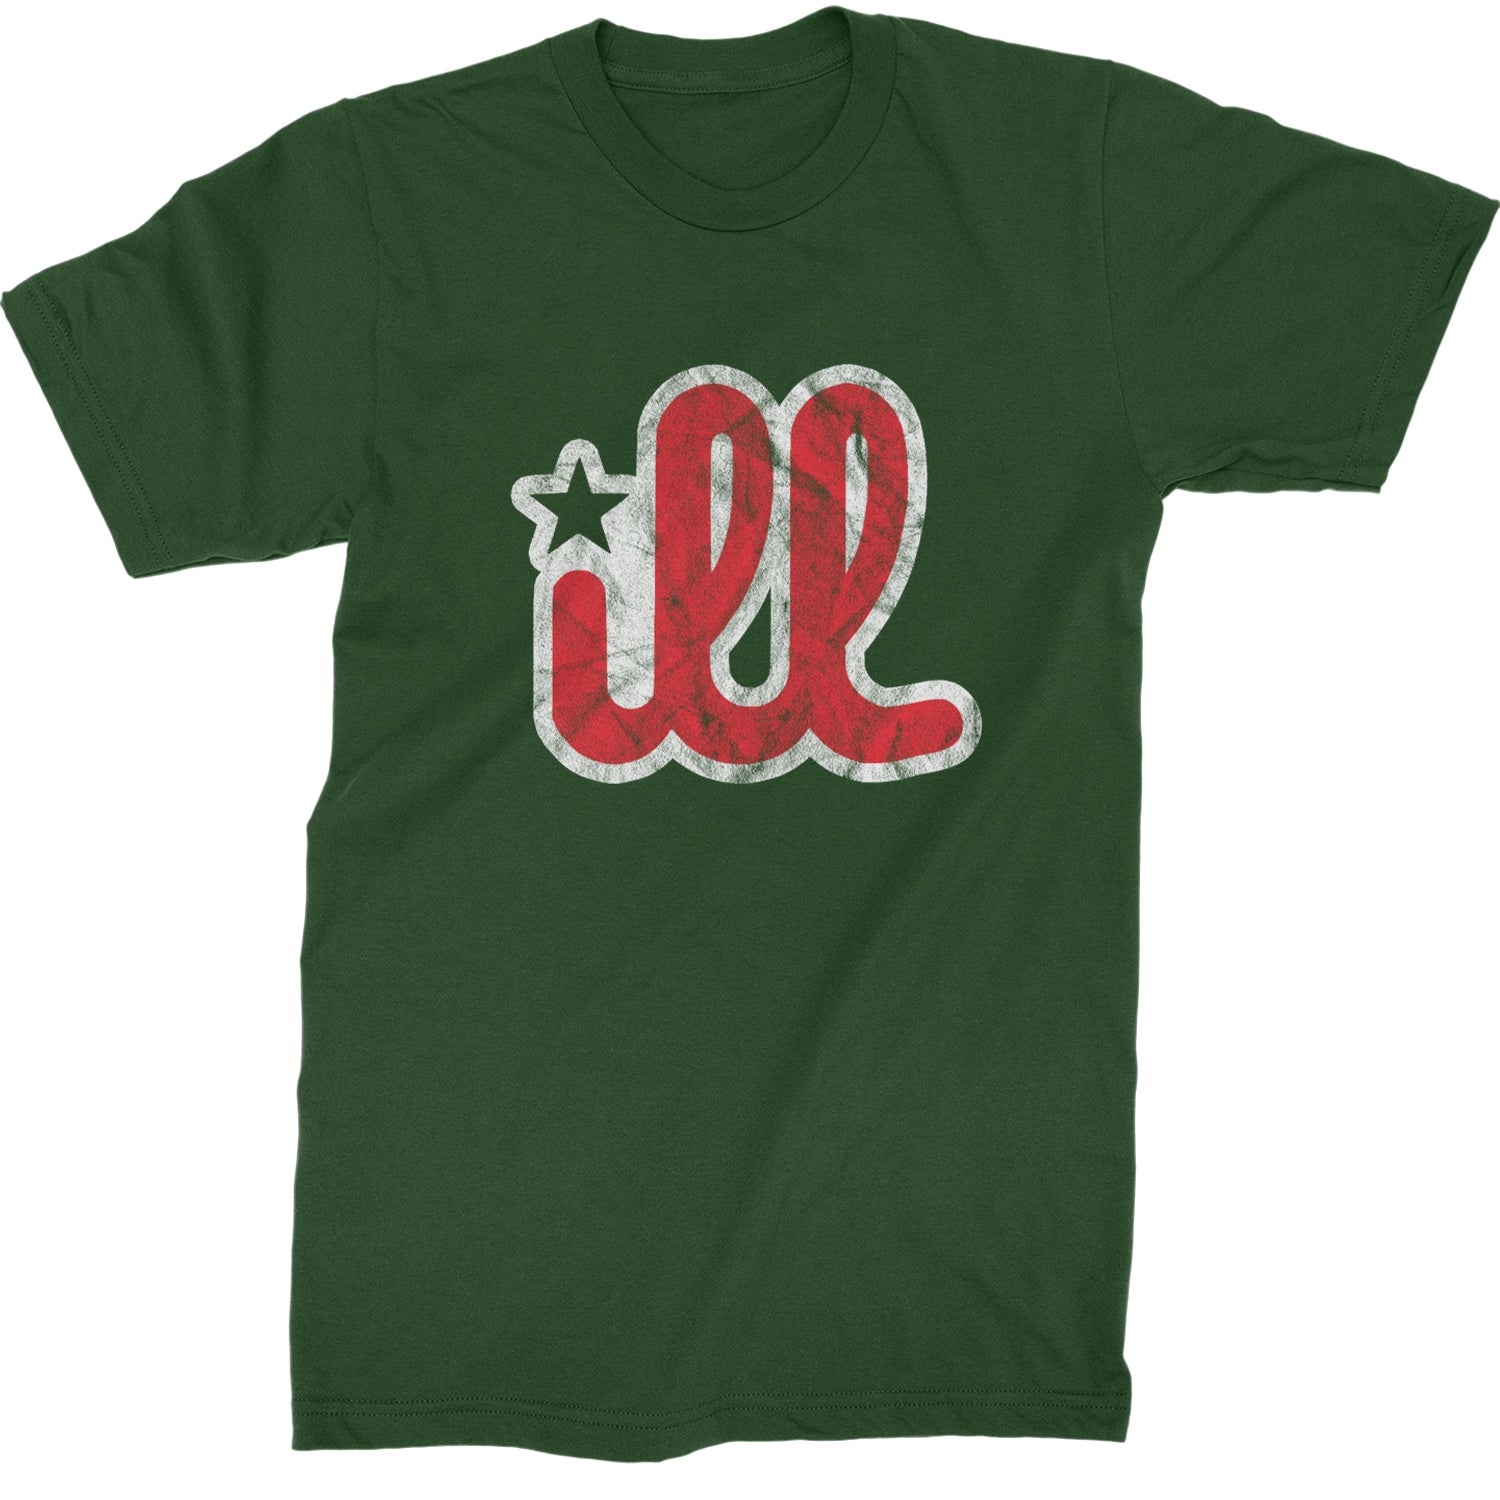 ILL Vintage It's A Philadelphia Philly Thing Mens T-shirt Forest Green